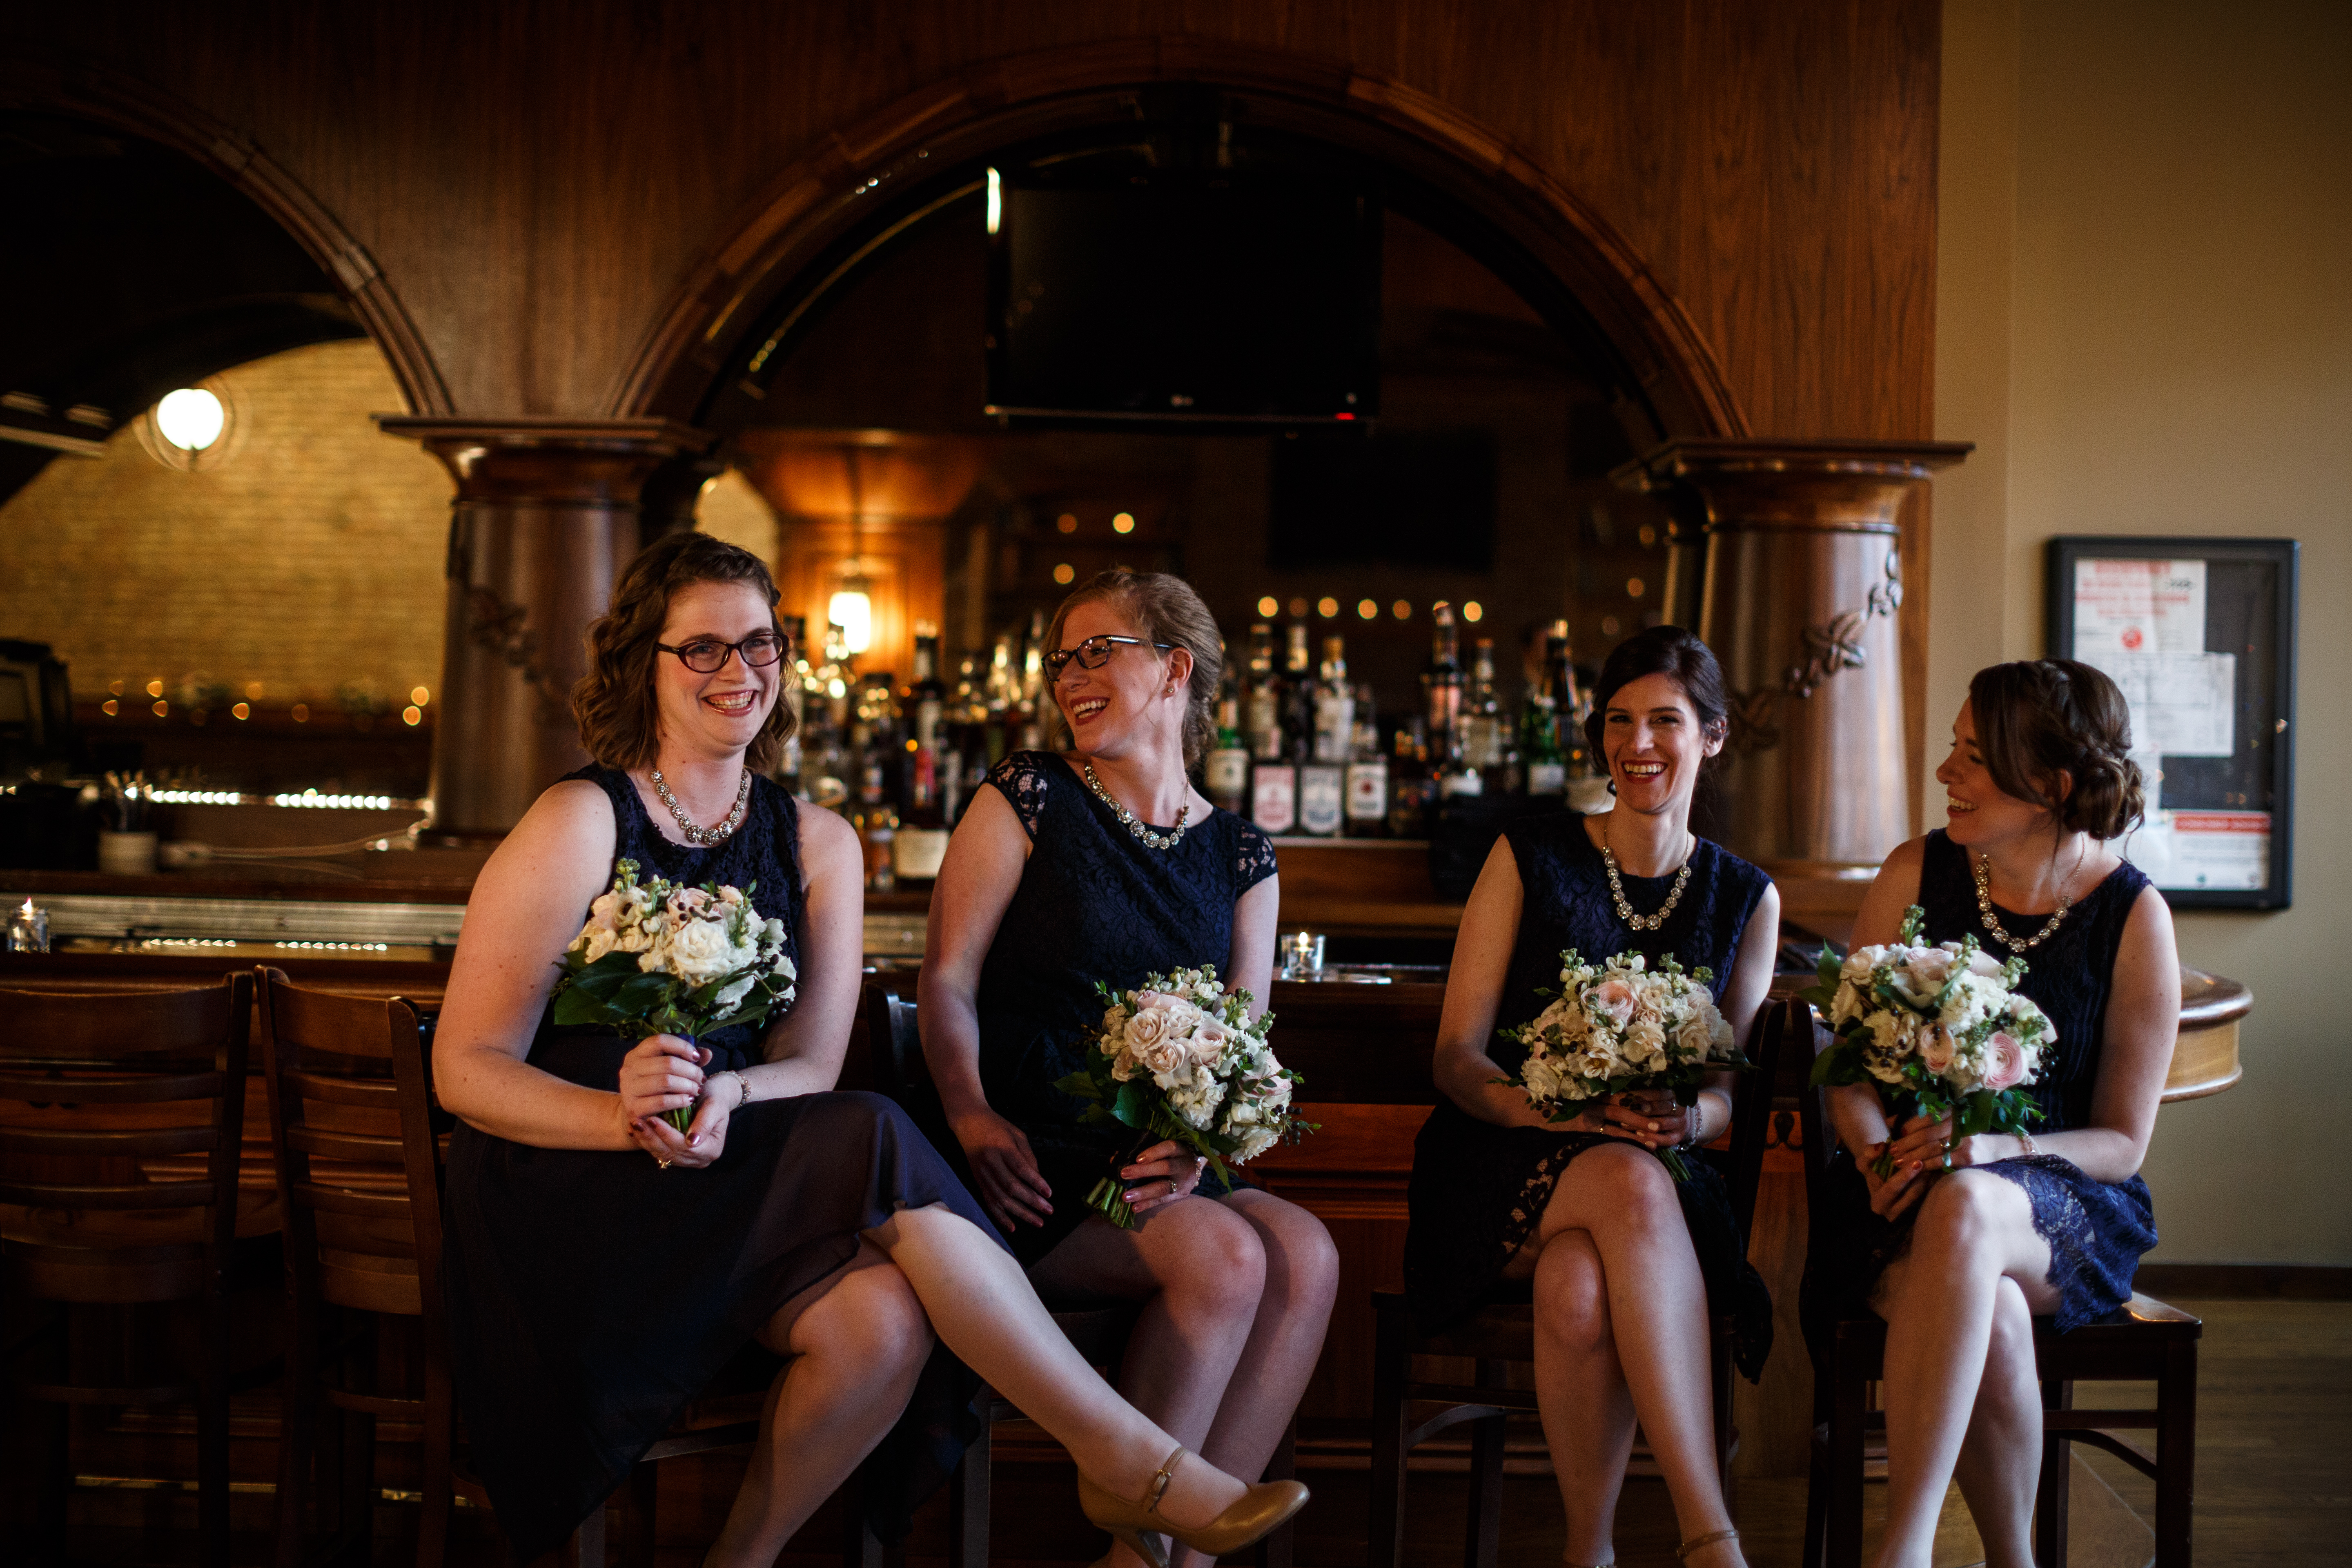 Spring bridesmaids at Revolution Brewing Chicago with pink and white bouquets of ranunculus, roses, and anemones.